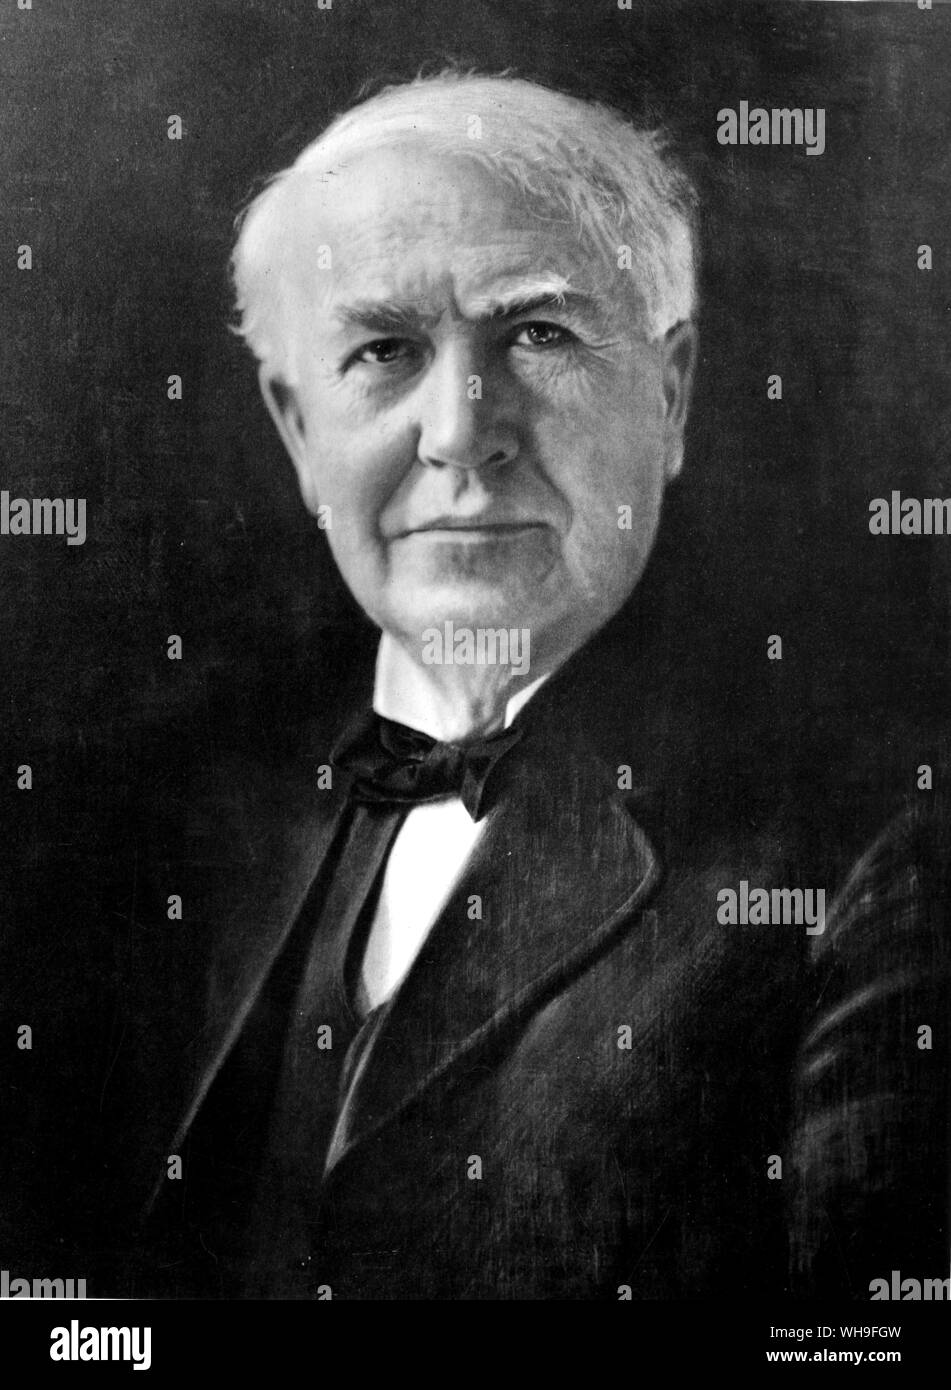 Thomas Alva Edison (1847-1931), US scientist and inventor, who founded the Edison Light Company in 1889. Stock Photo